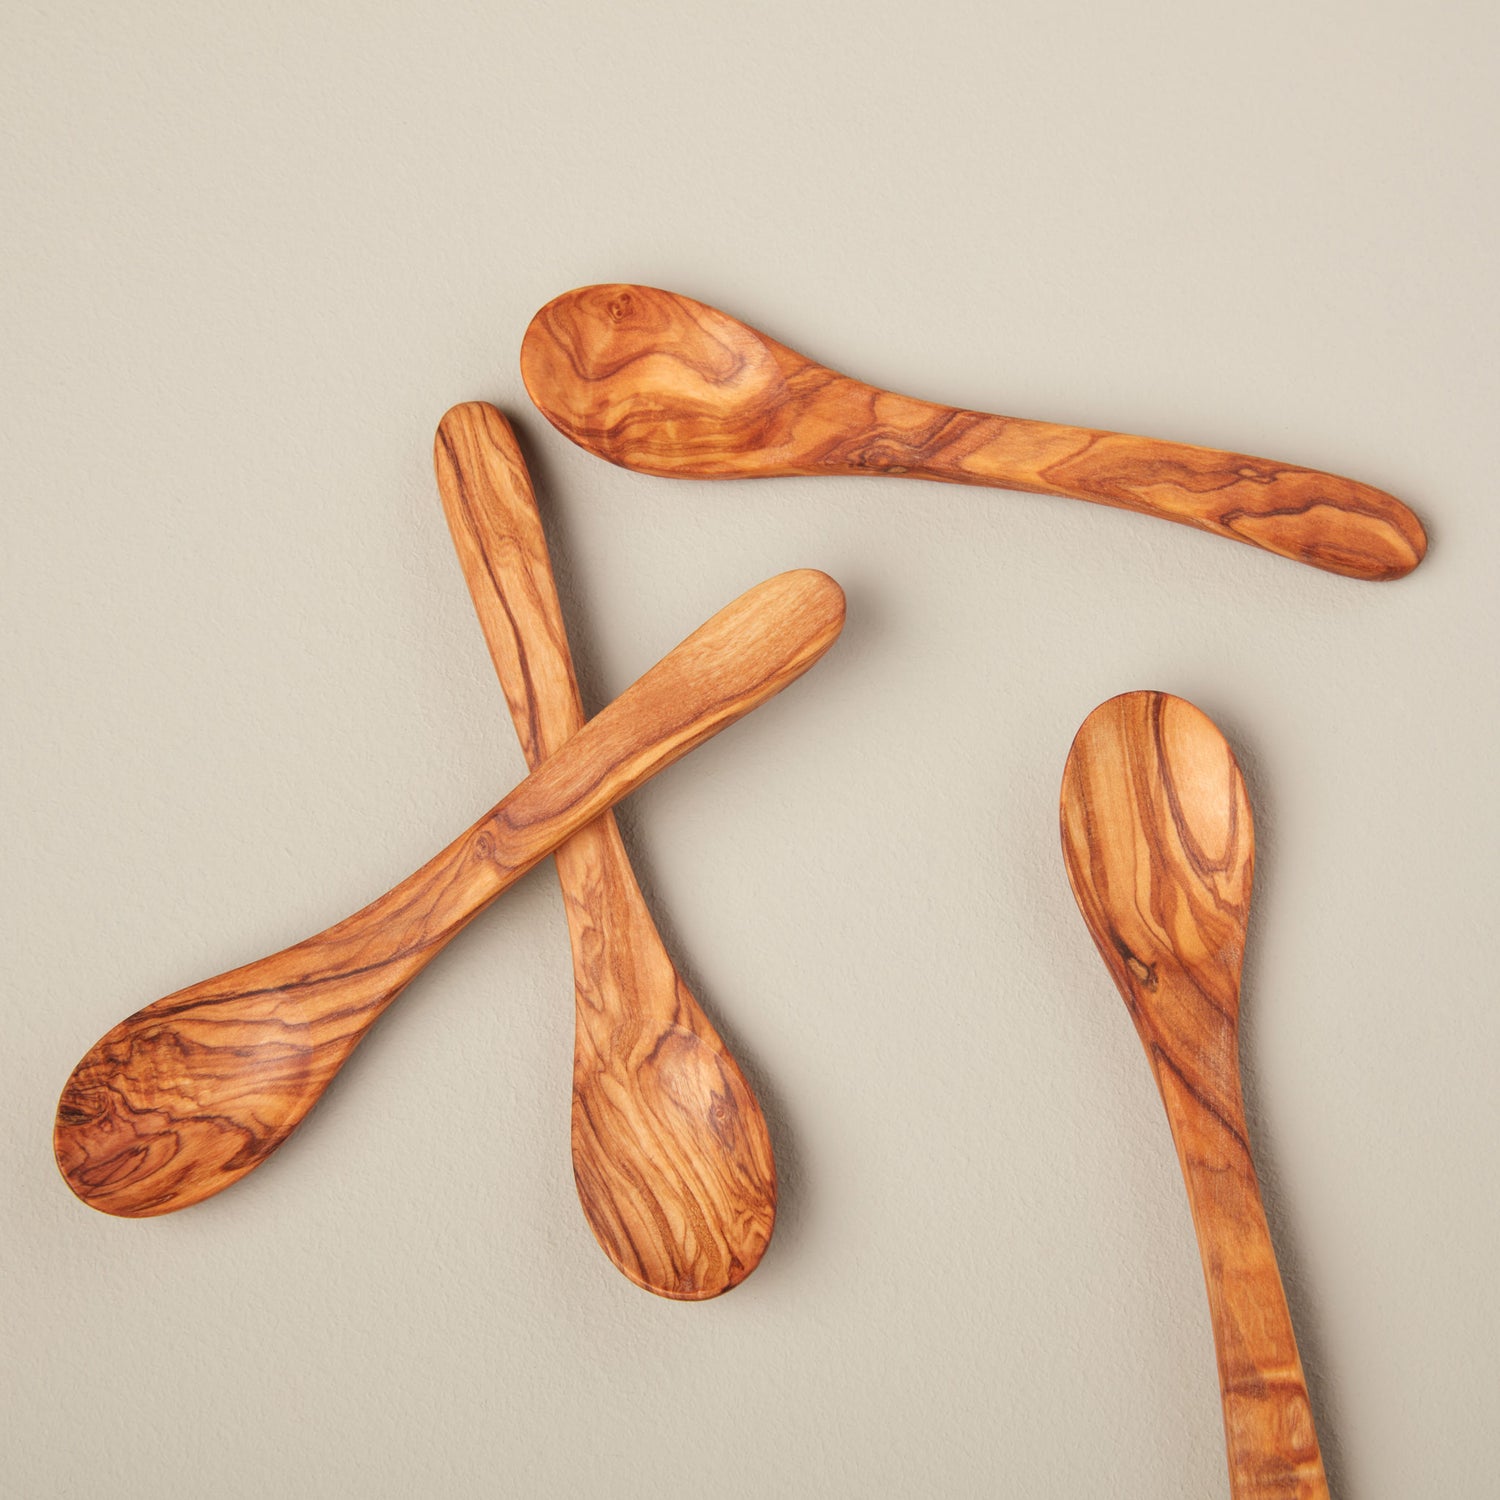 https://behome.com/cdn/shop/products/Be-Home_Olive-Wood-Spoons-Small-Set-of-4_50-02.jpg?v=1605727244&width=1500